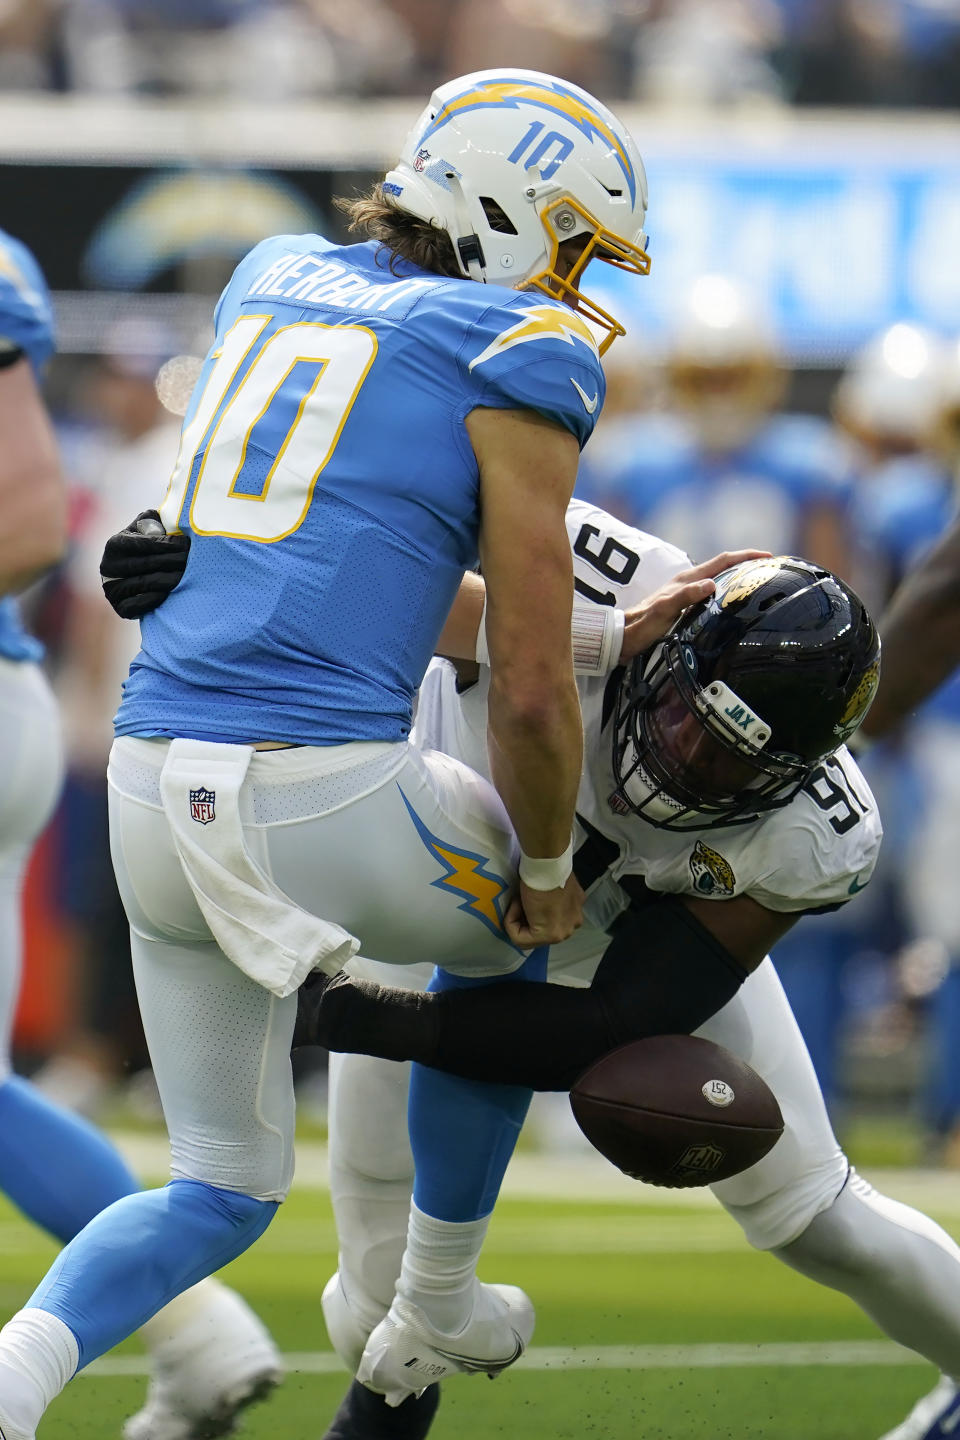 Los Angeles Chargers quarterback Justin Herbert (10) fumbles the ball as he is sacked by Jacksonville Jaguars defensive end Dawuane Smoot (91) during the first half of an NFL football game in Inglewood, Calif., Sunday, Sept. 25, 2022. The Jaguars recovered the ball. (AP Photo/Marcio Jose Sanchez)